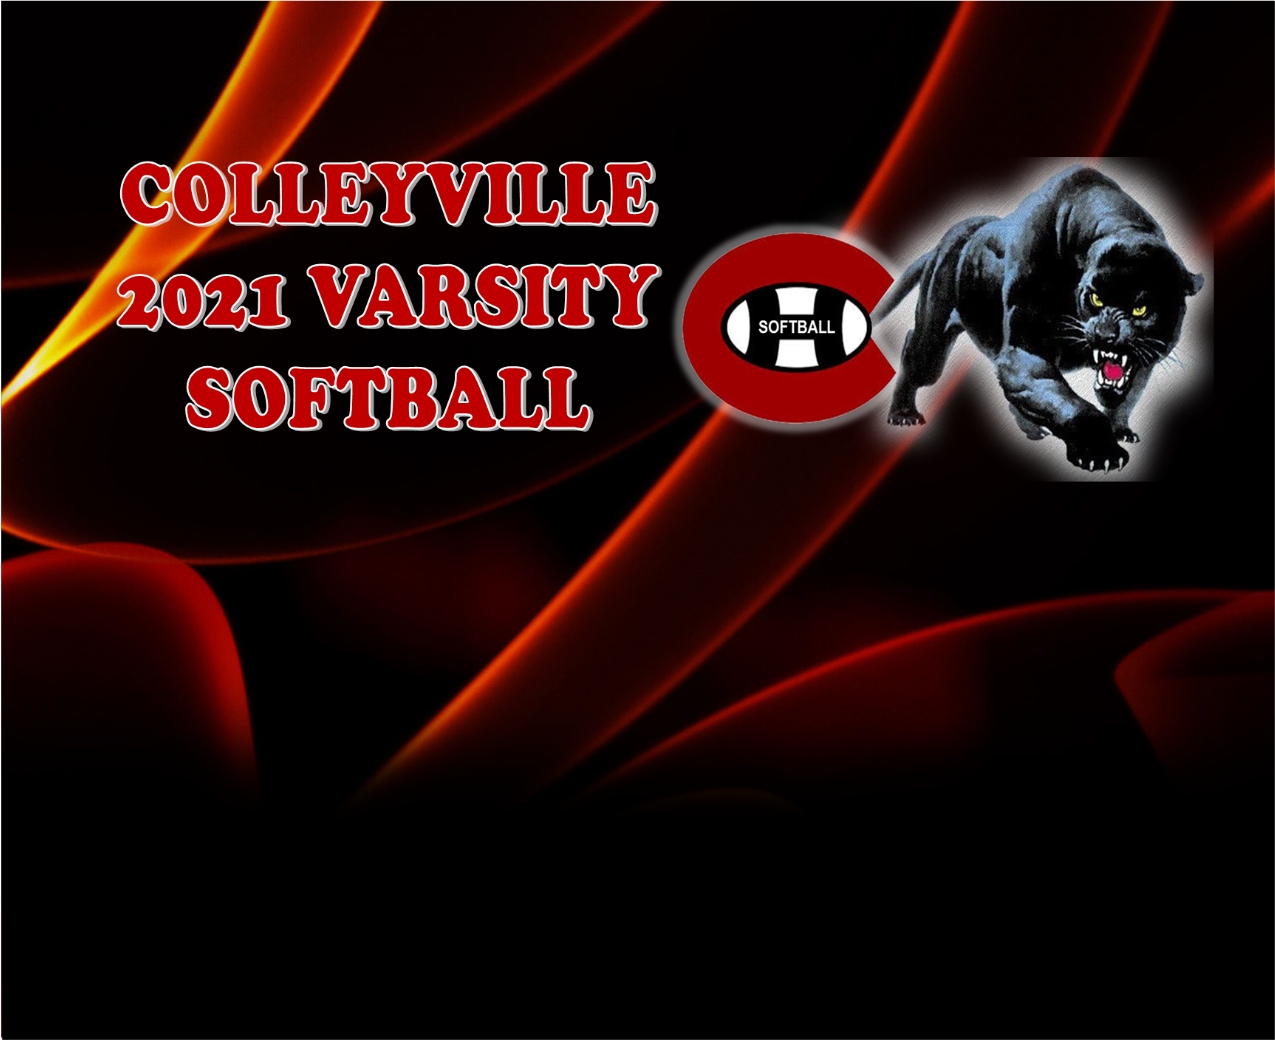 GCISD Softball: Colleyville Panthers Go Ahead in Sixth Inning for Win Over Northwest Texans 6-4